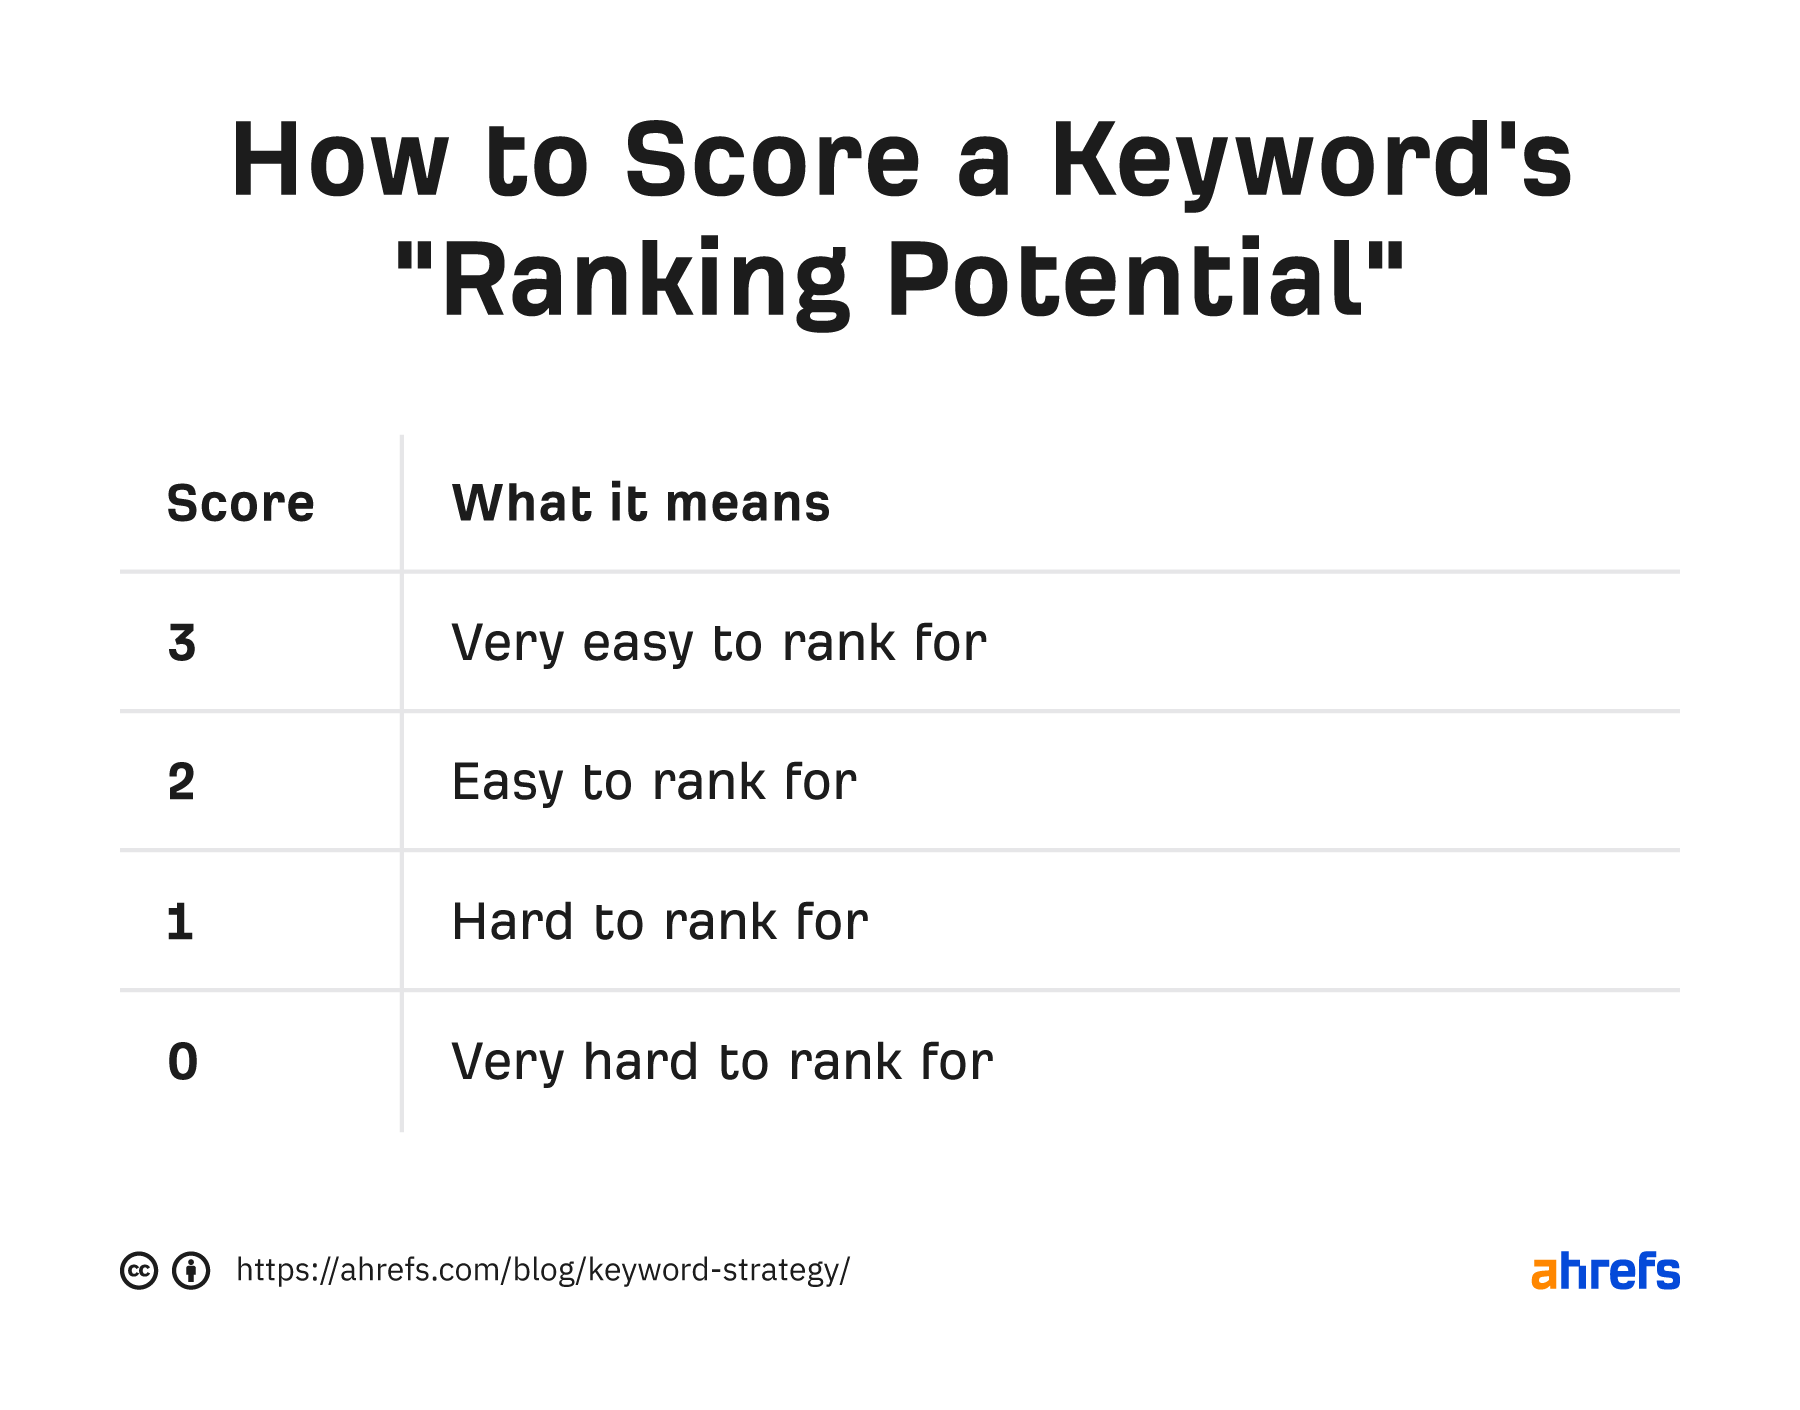 How to score a keyword's ranking potential